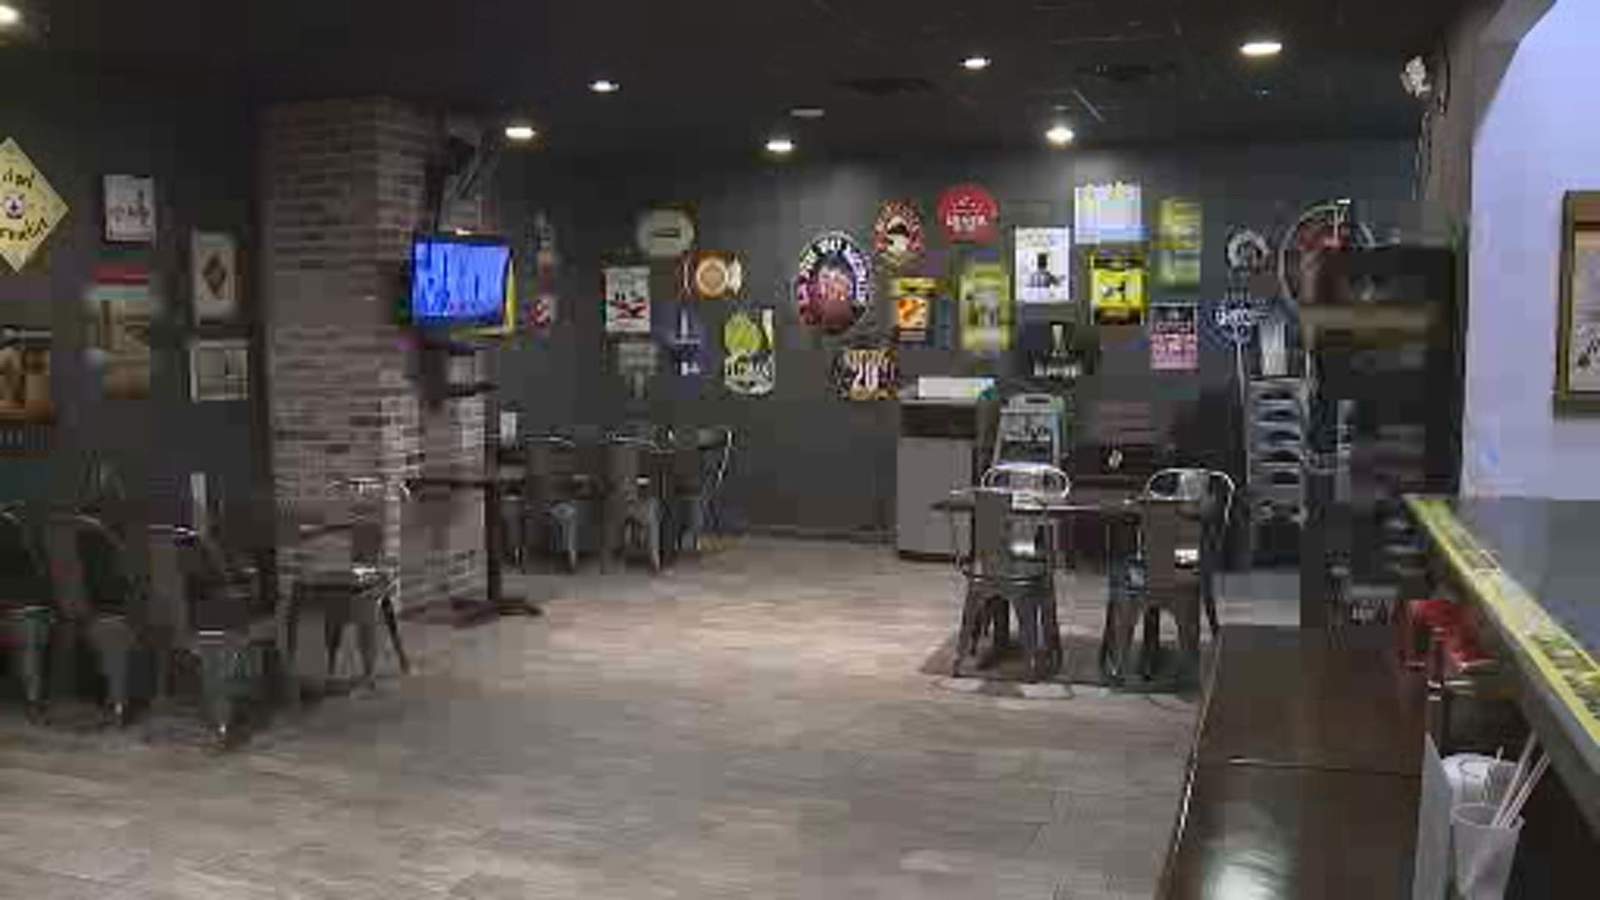 Bar, nightclub owners anticipate governors announcement in hopes of reopening